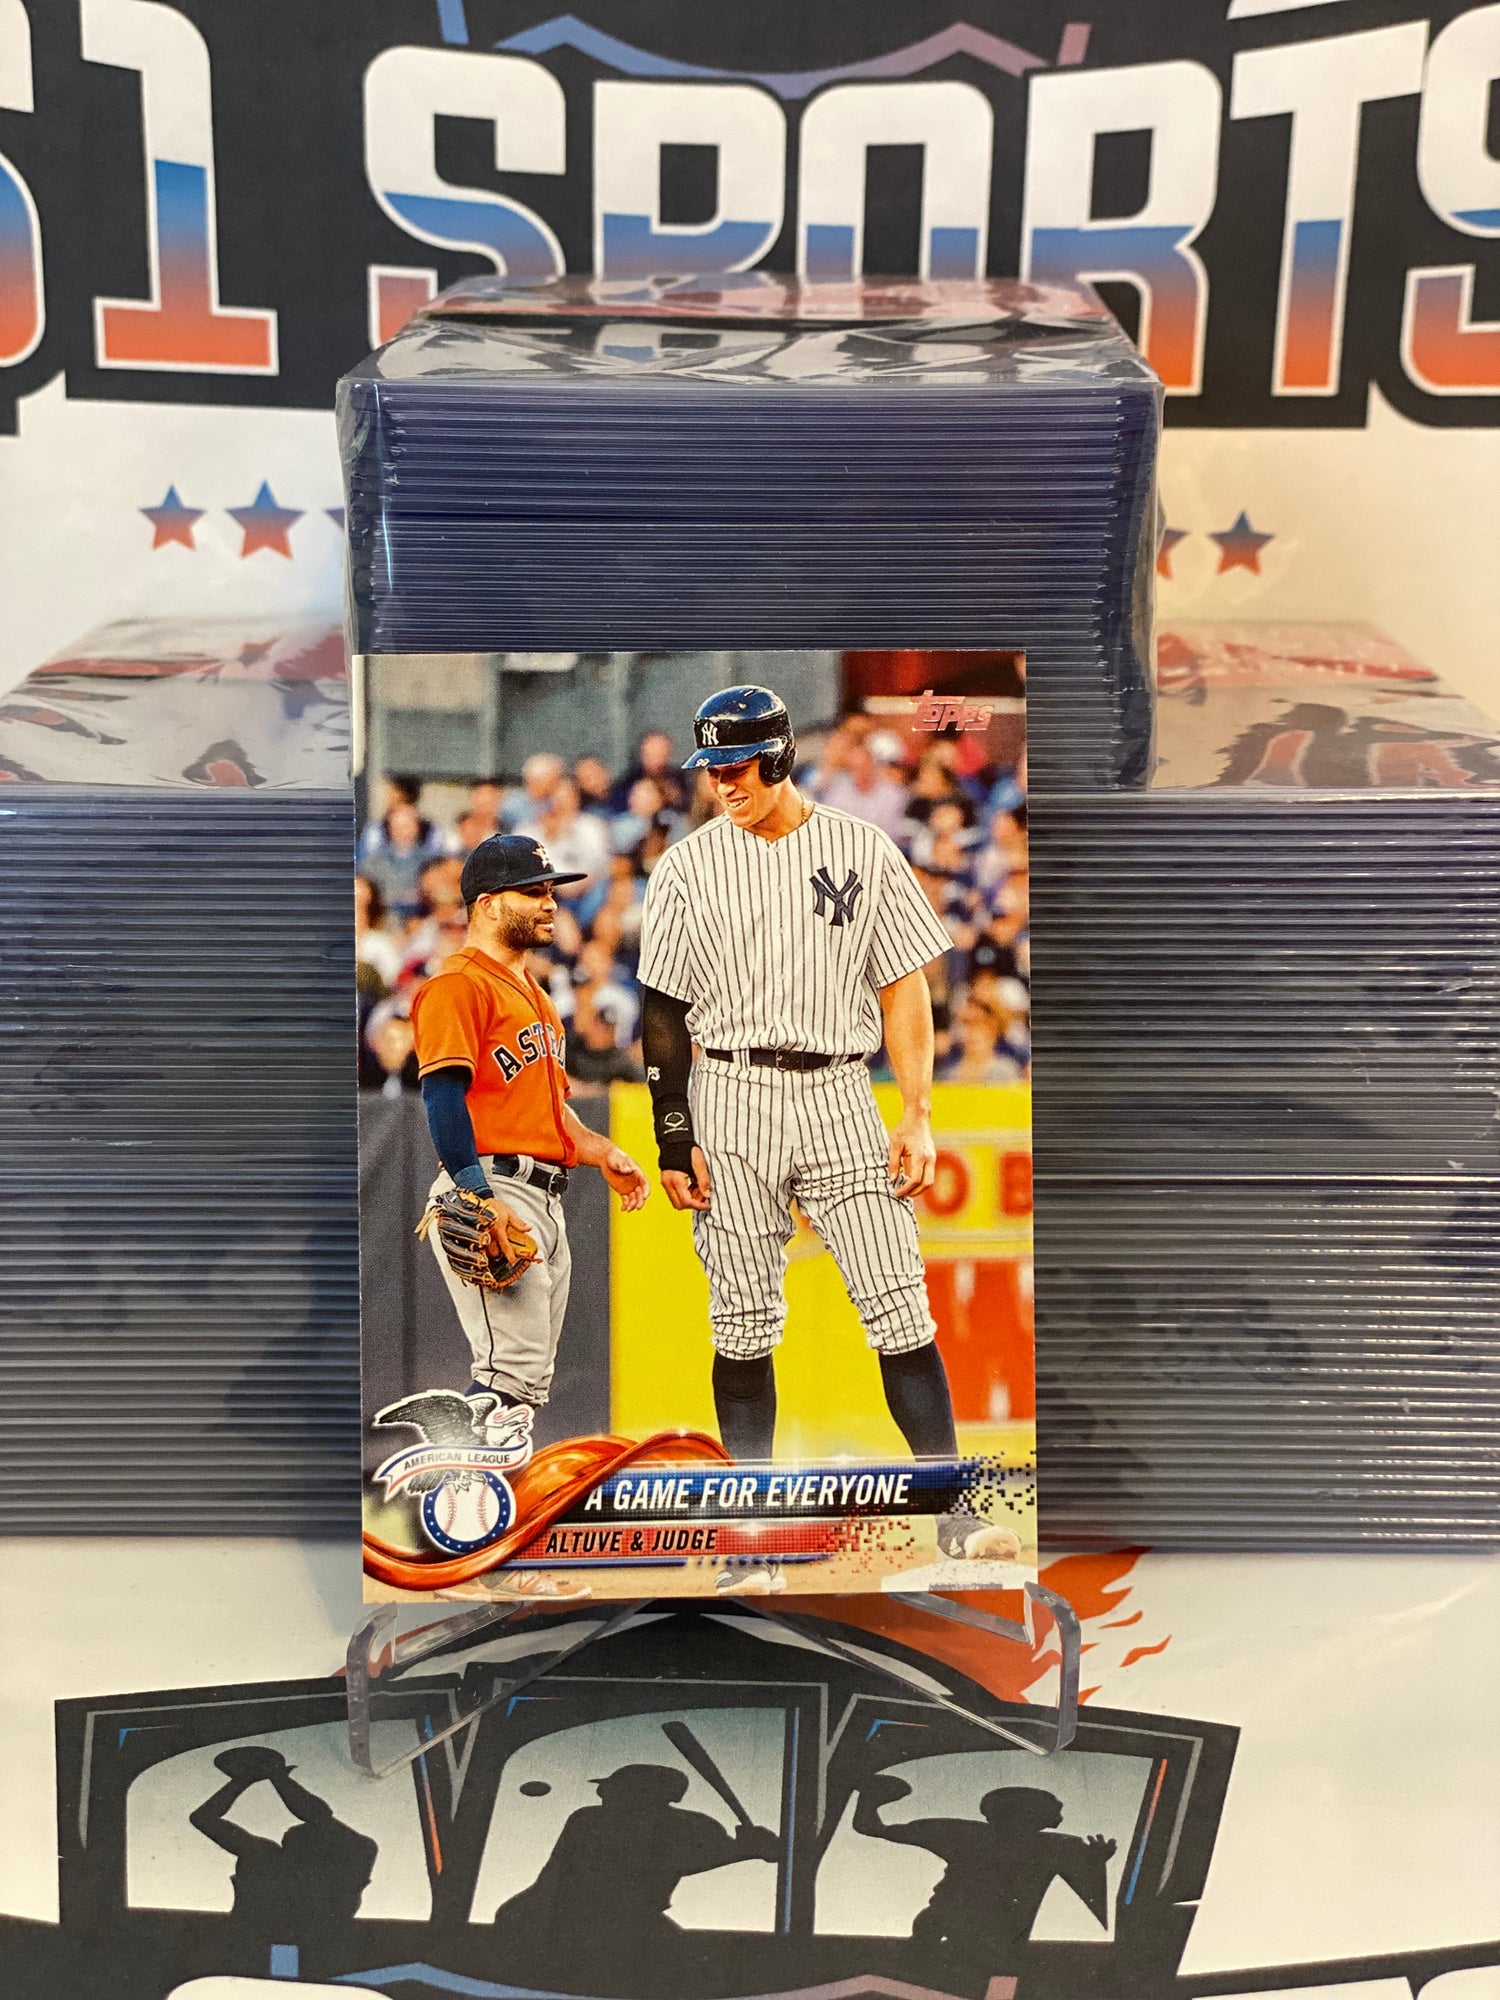 2018 Topps Update #US79 Aaron Judge Jose Altuve - A Game For